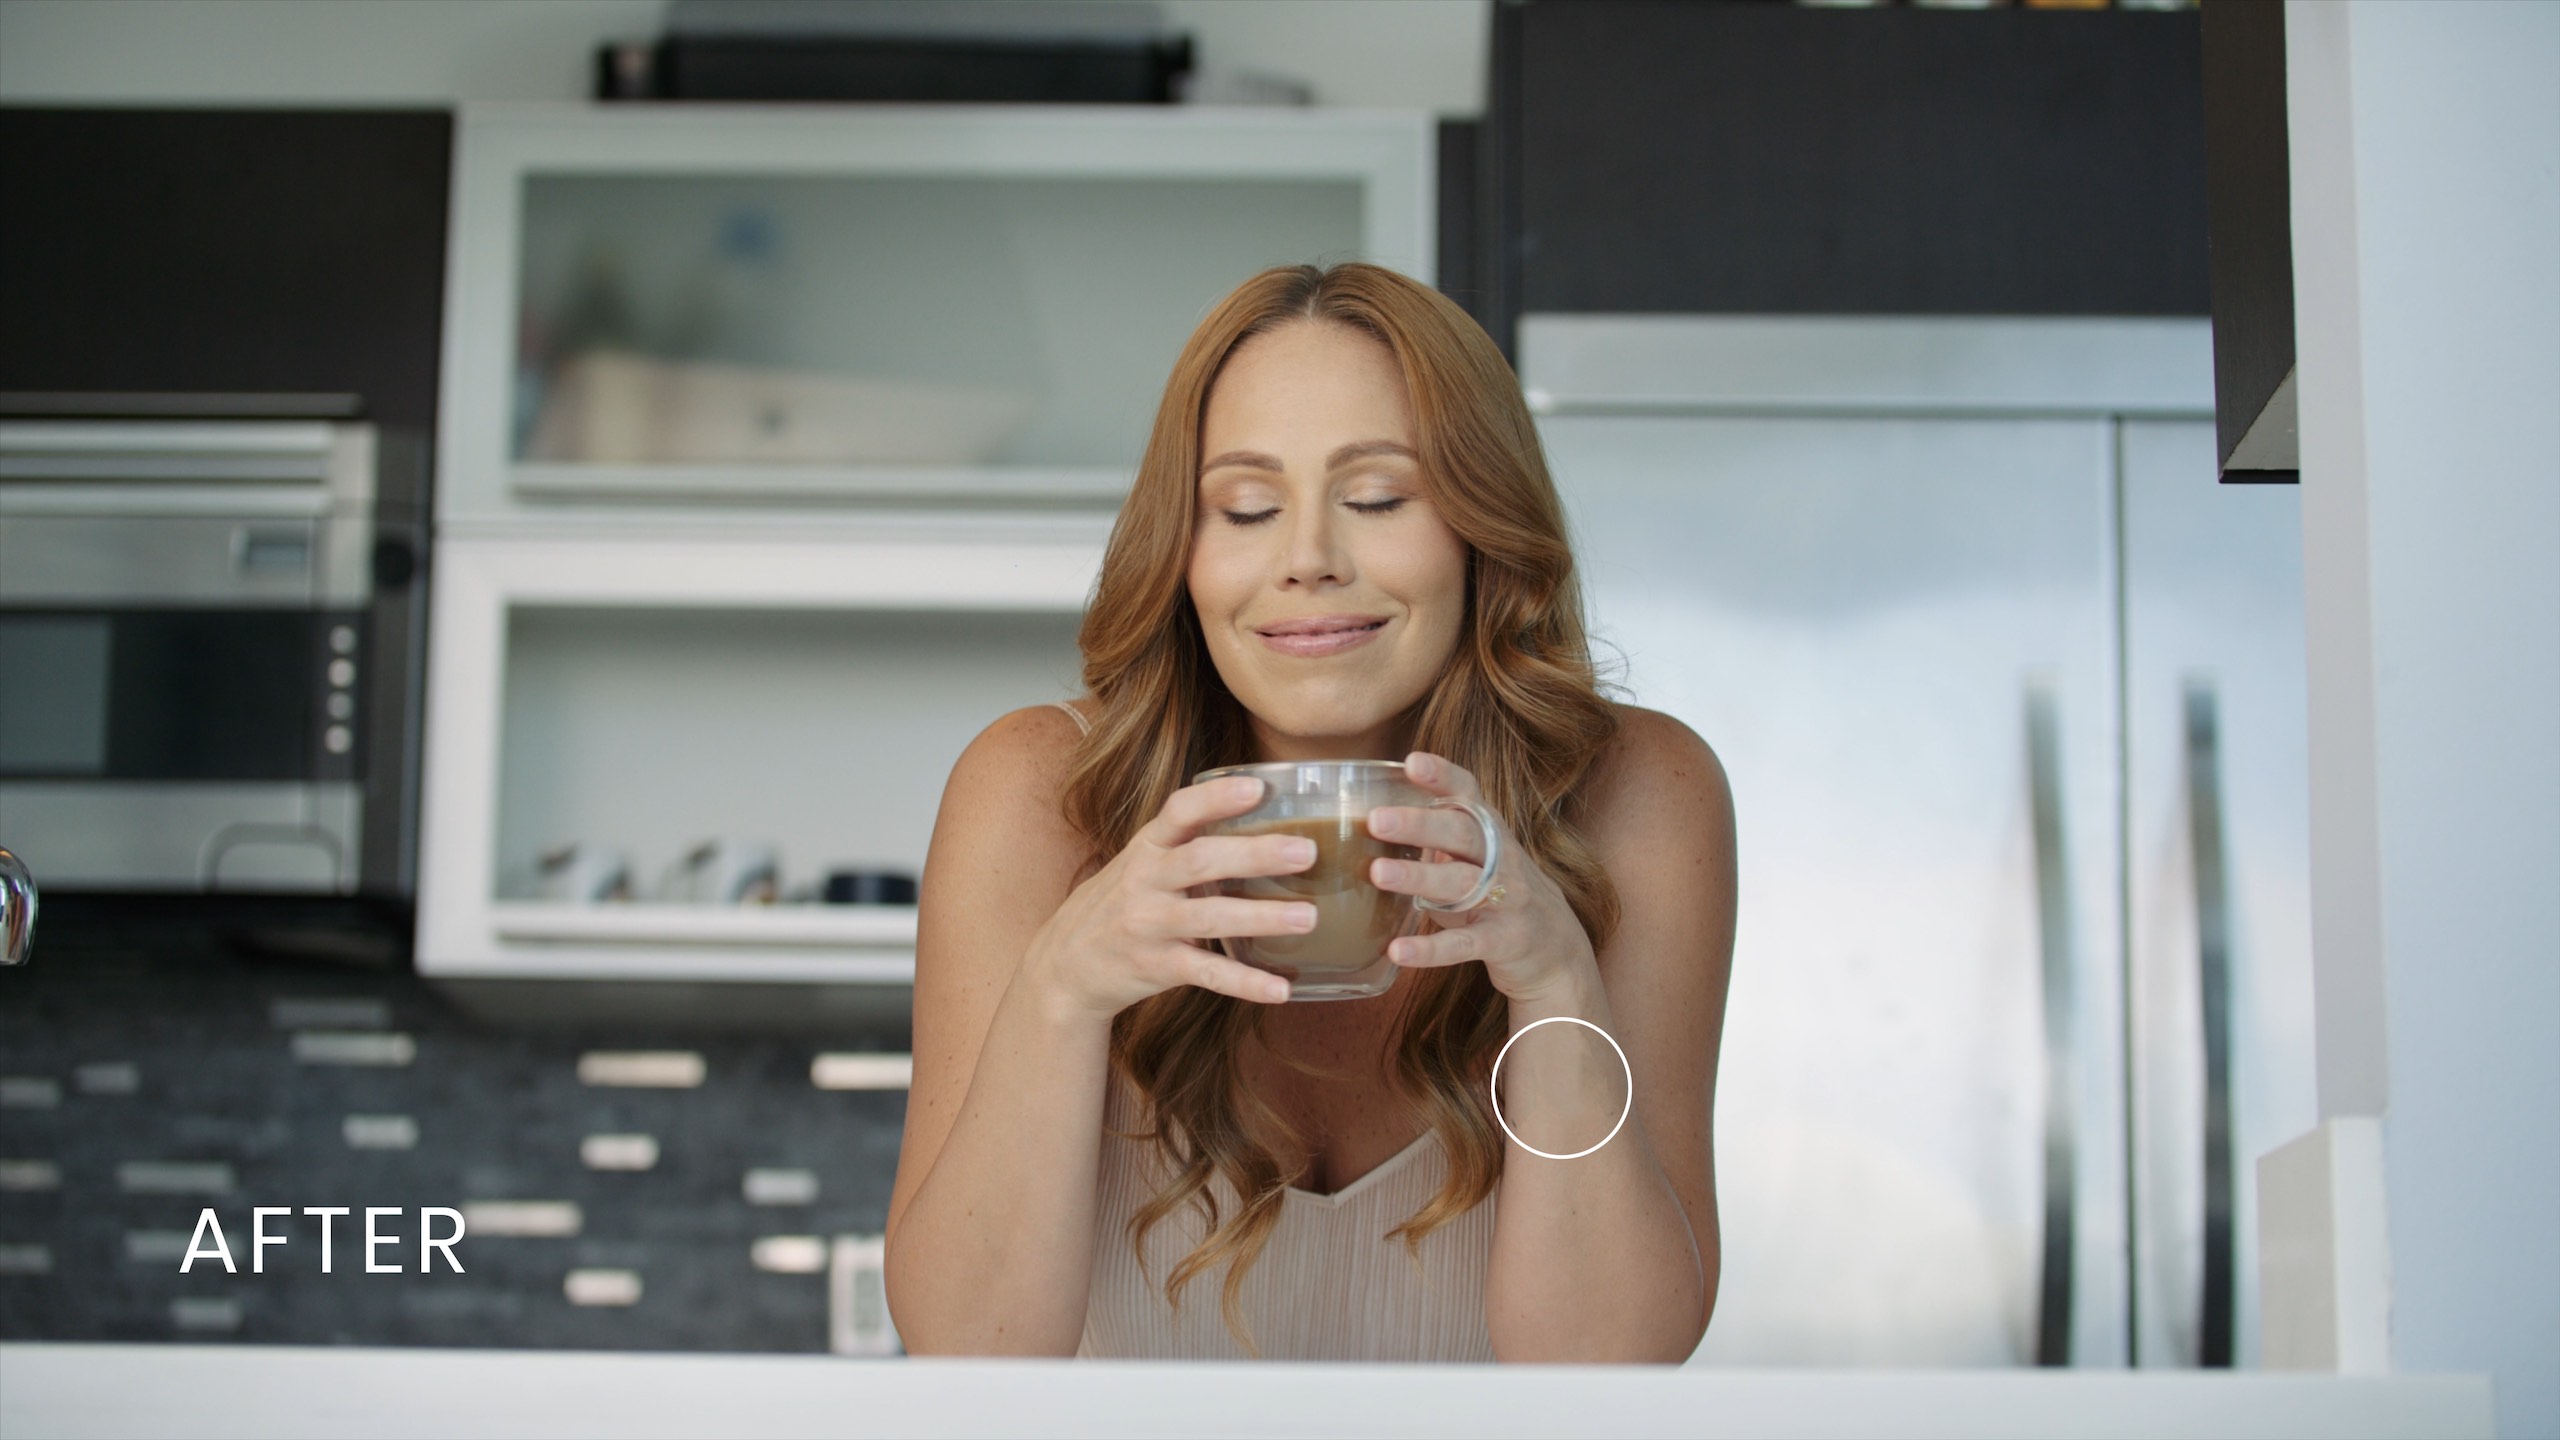 VFX Breakdown Animations with white title After over image of woman enjoying a cup of coffee smiling with her eyes closed in a kitchen